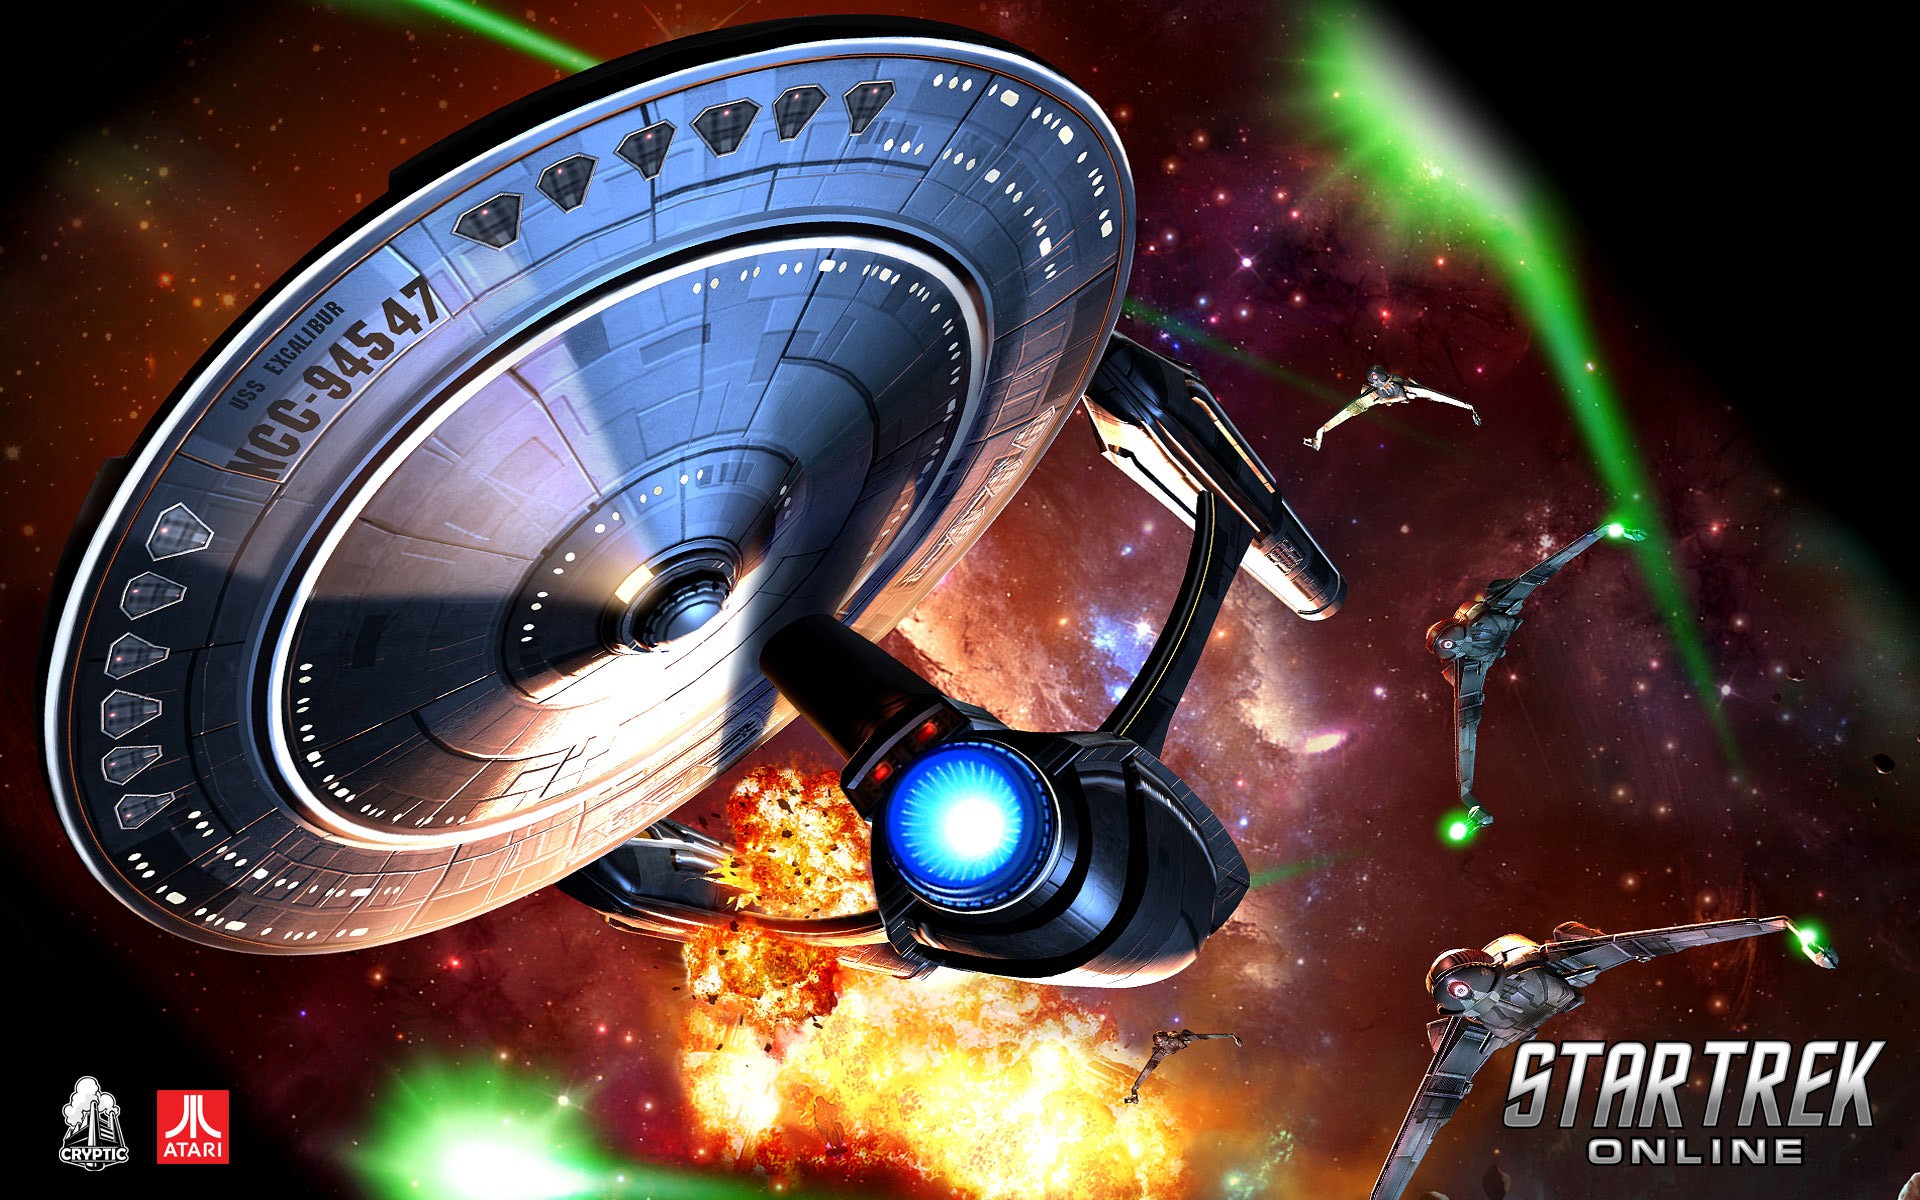 Free Download Hd Star Trek Online Wallpaper For Iphone Android Mobile 19x10 For Your Desktop Mobile Tablet Explore 50 Star Trek Wallpaper Android Star Trek Wallpaper Star Trek